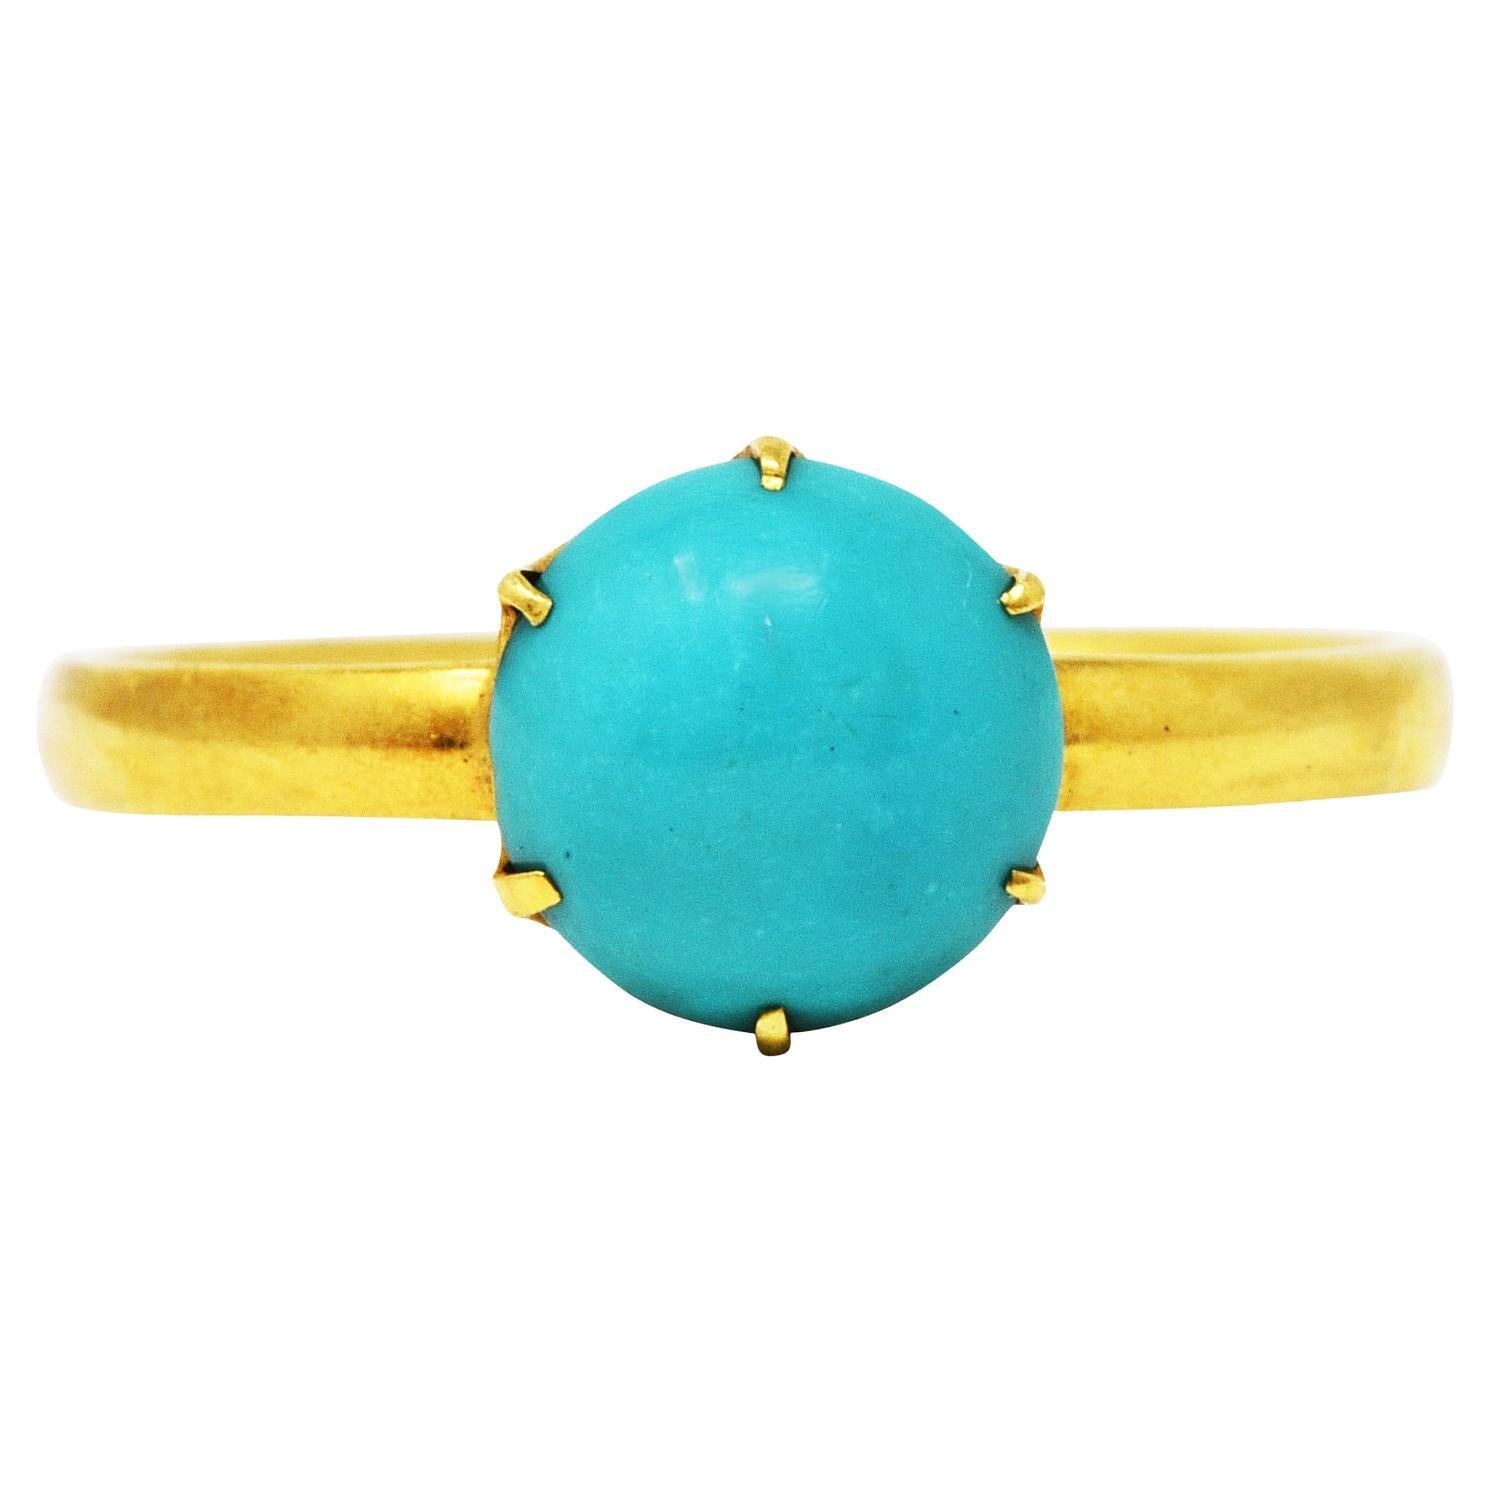 1960's Tiffany & Co. Turquoise 18 Karat Gold Solitaire Ring